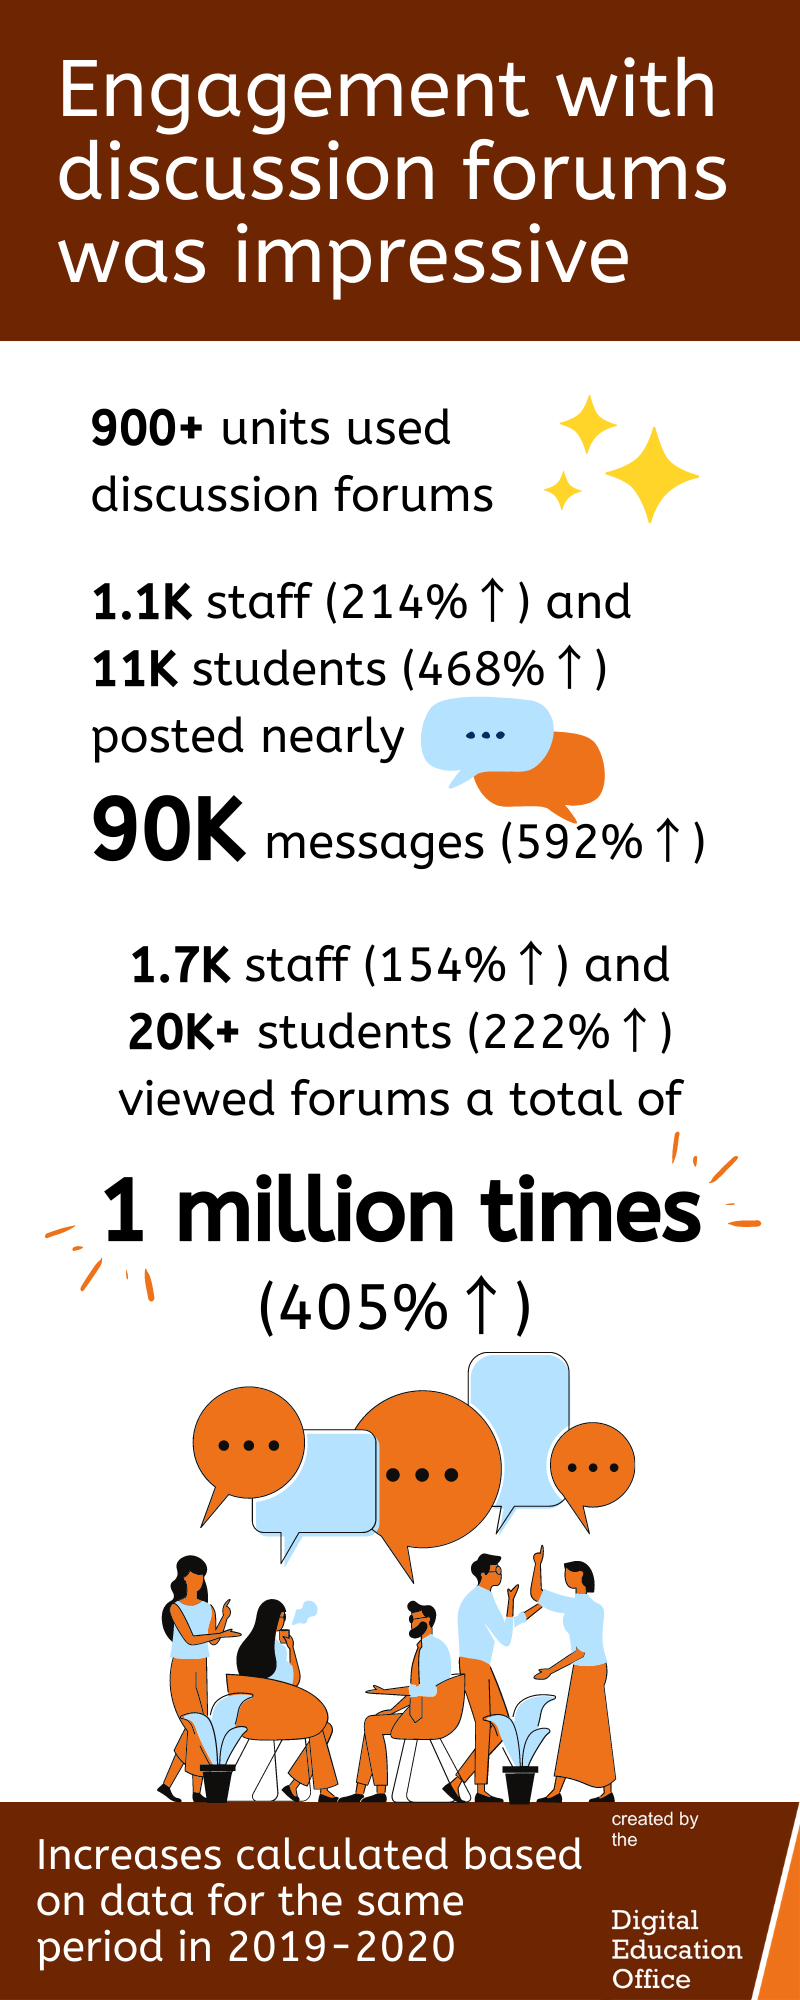 Engagement with discussion forums was impressive. 900+ units used discussion forums. 1.1K staff (up 214%) and 11K students (up 468%) posted nearly 90K messages (up 592%). 1.7K staff (up 154%) and 20K+ students (up 222%) viewed forums a total of 1 million times (405%). Increases calculated based on data for the same perion in 2019-2020. Created by the Digital Education Office.